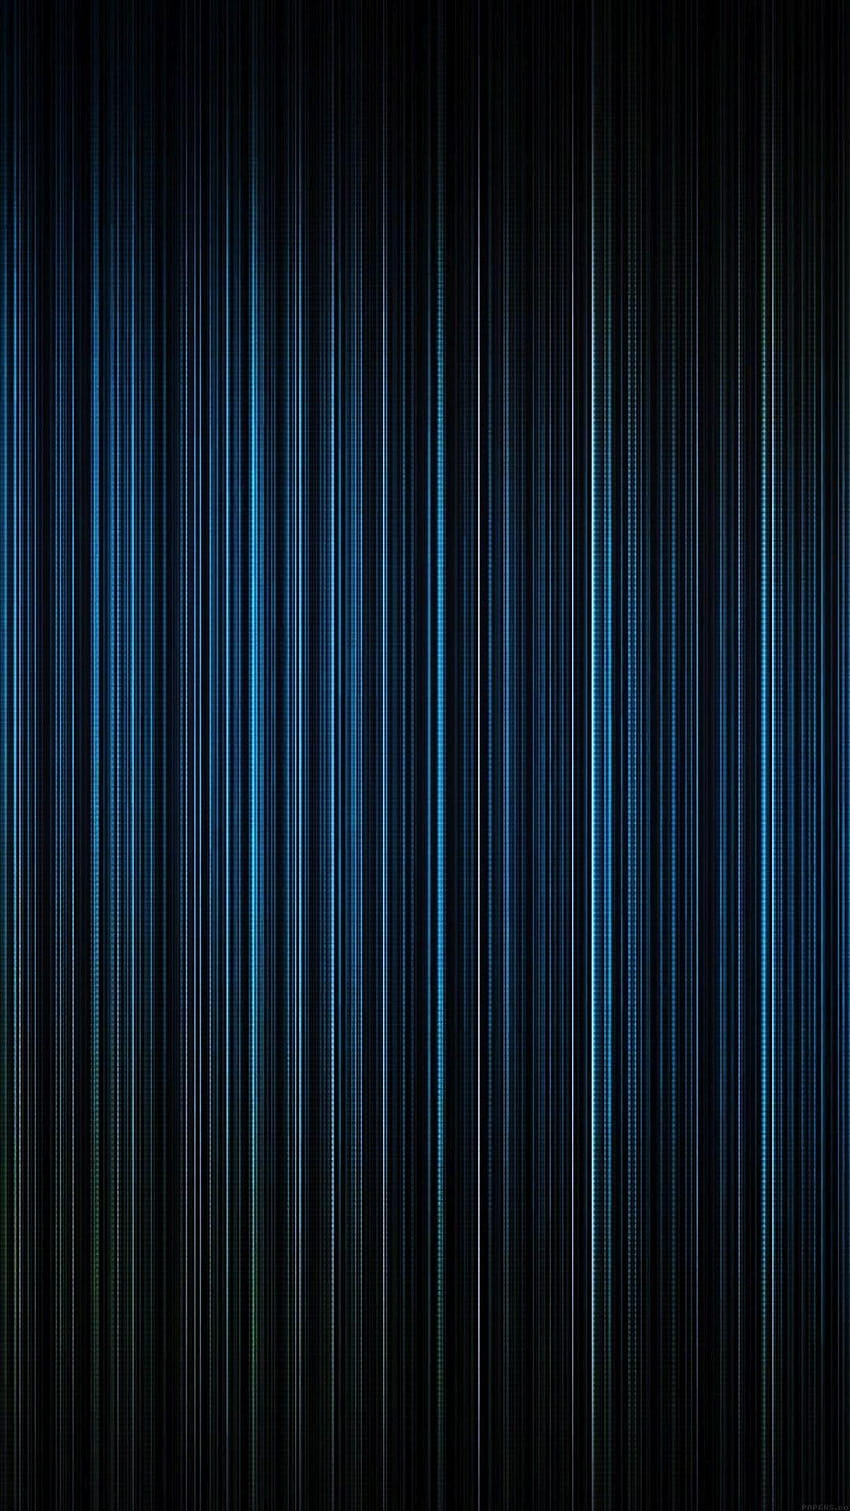 Green colored straight lines Vertical Wallpaper - TenStickers